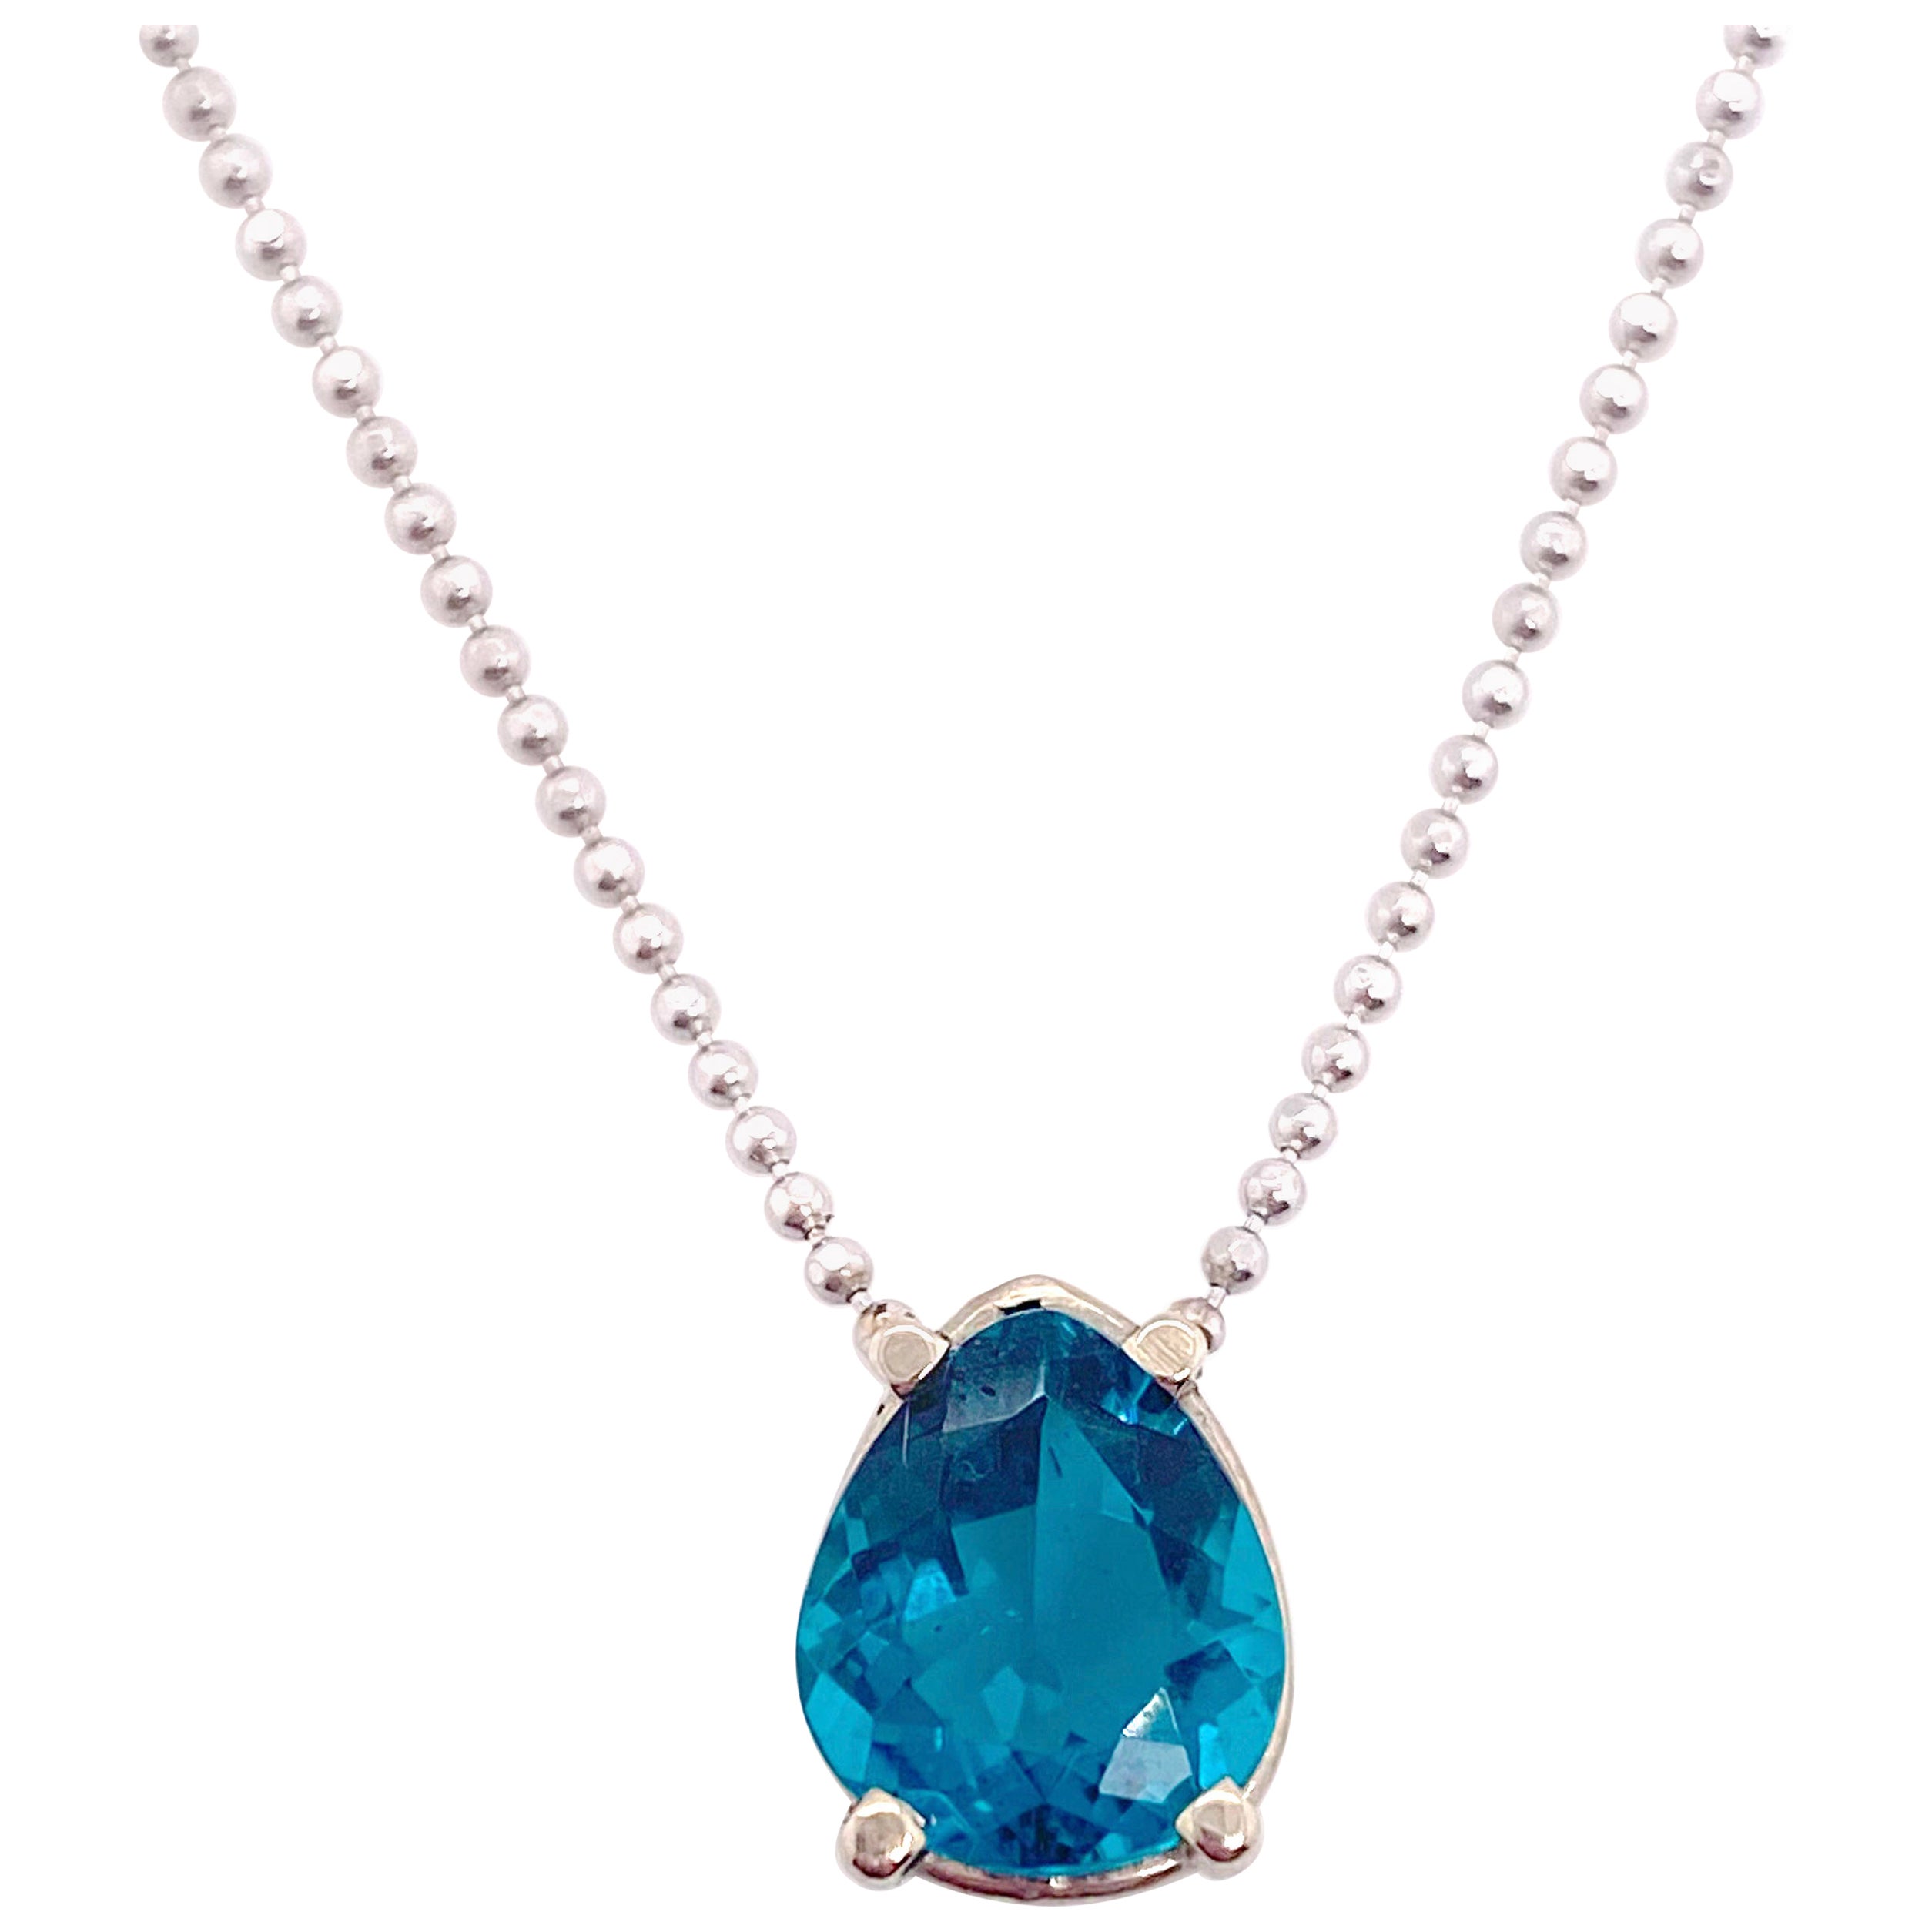 Apatite Pendant Necklace, White Gold, 1.80 Carats Pear Shaped Turquoise Color